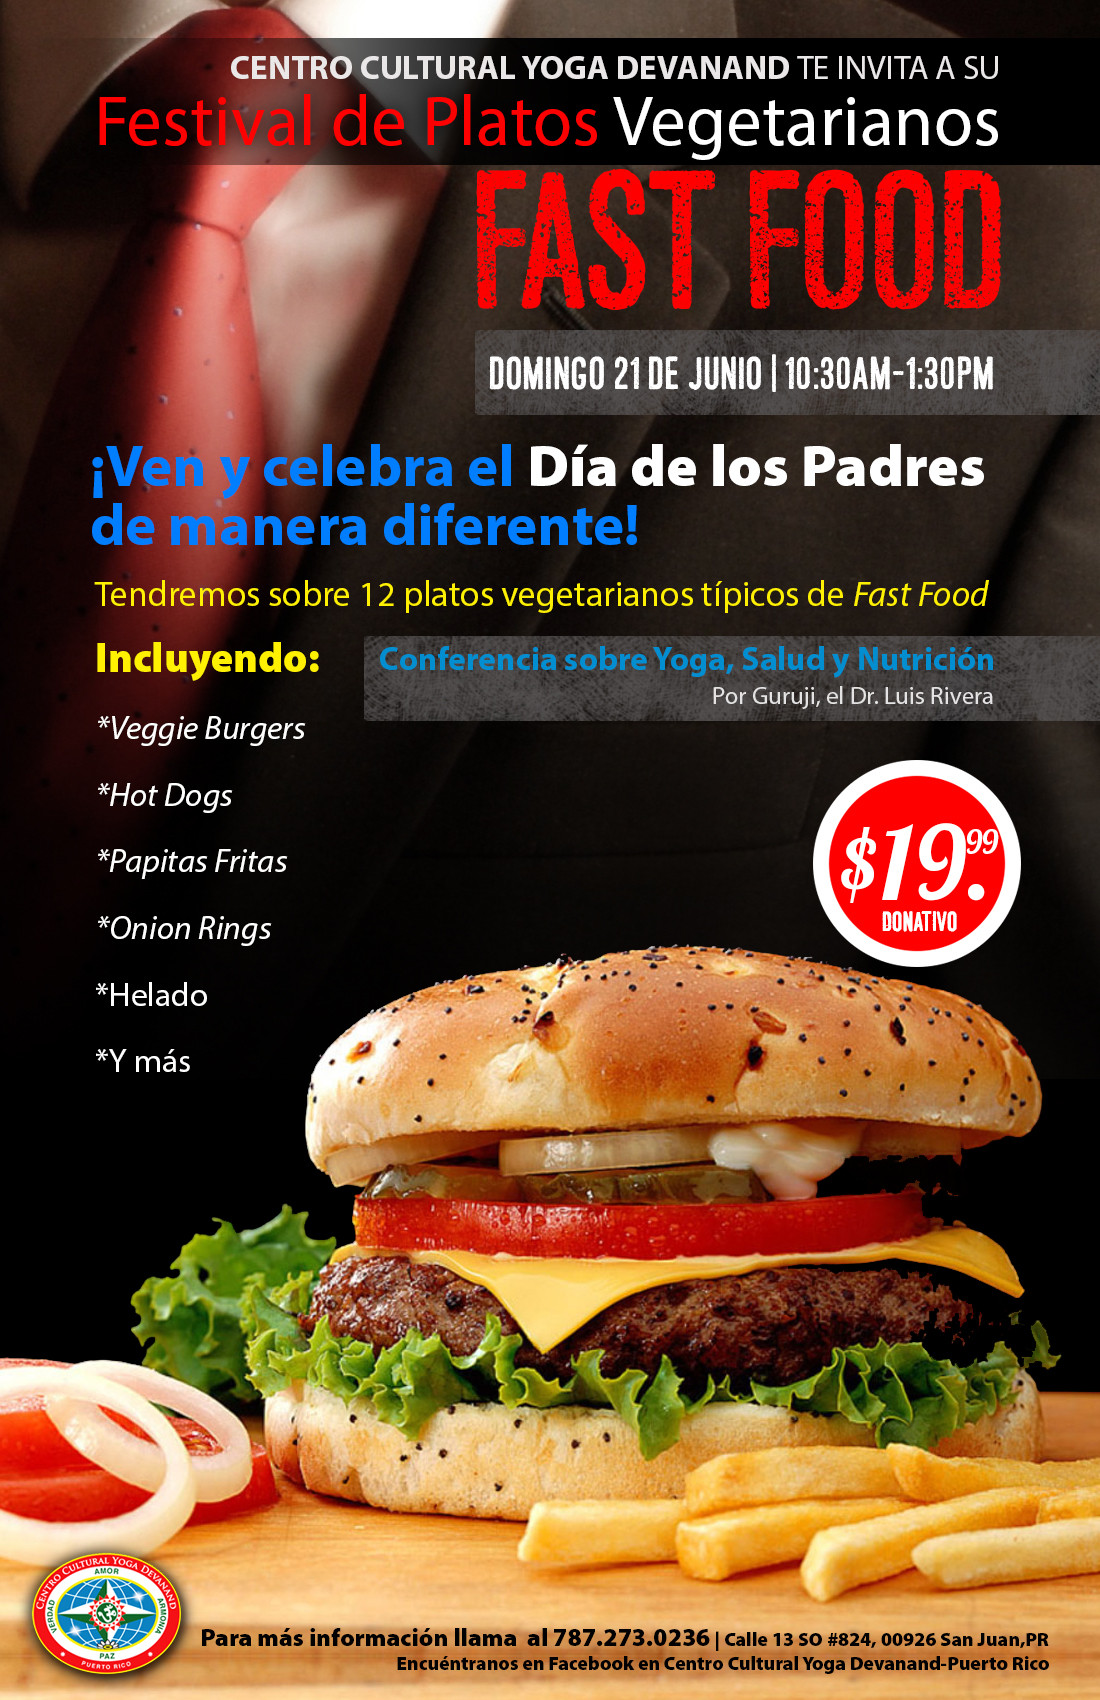 Free Food Fathers Day
 Ve arian Fast Food for Father’s Day